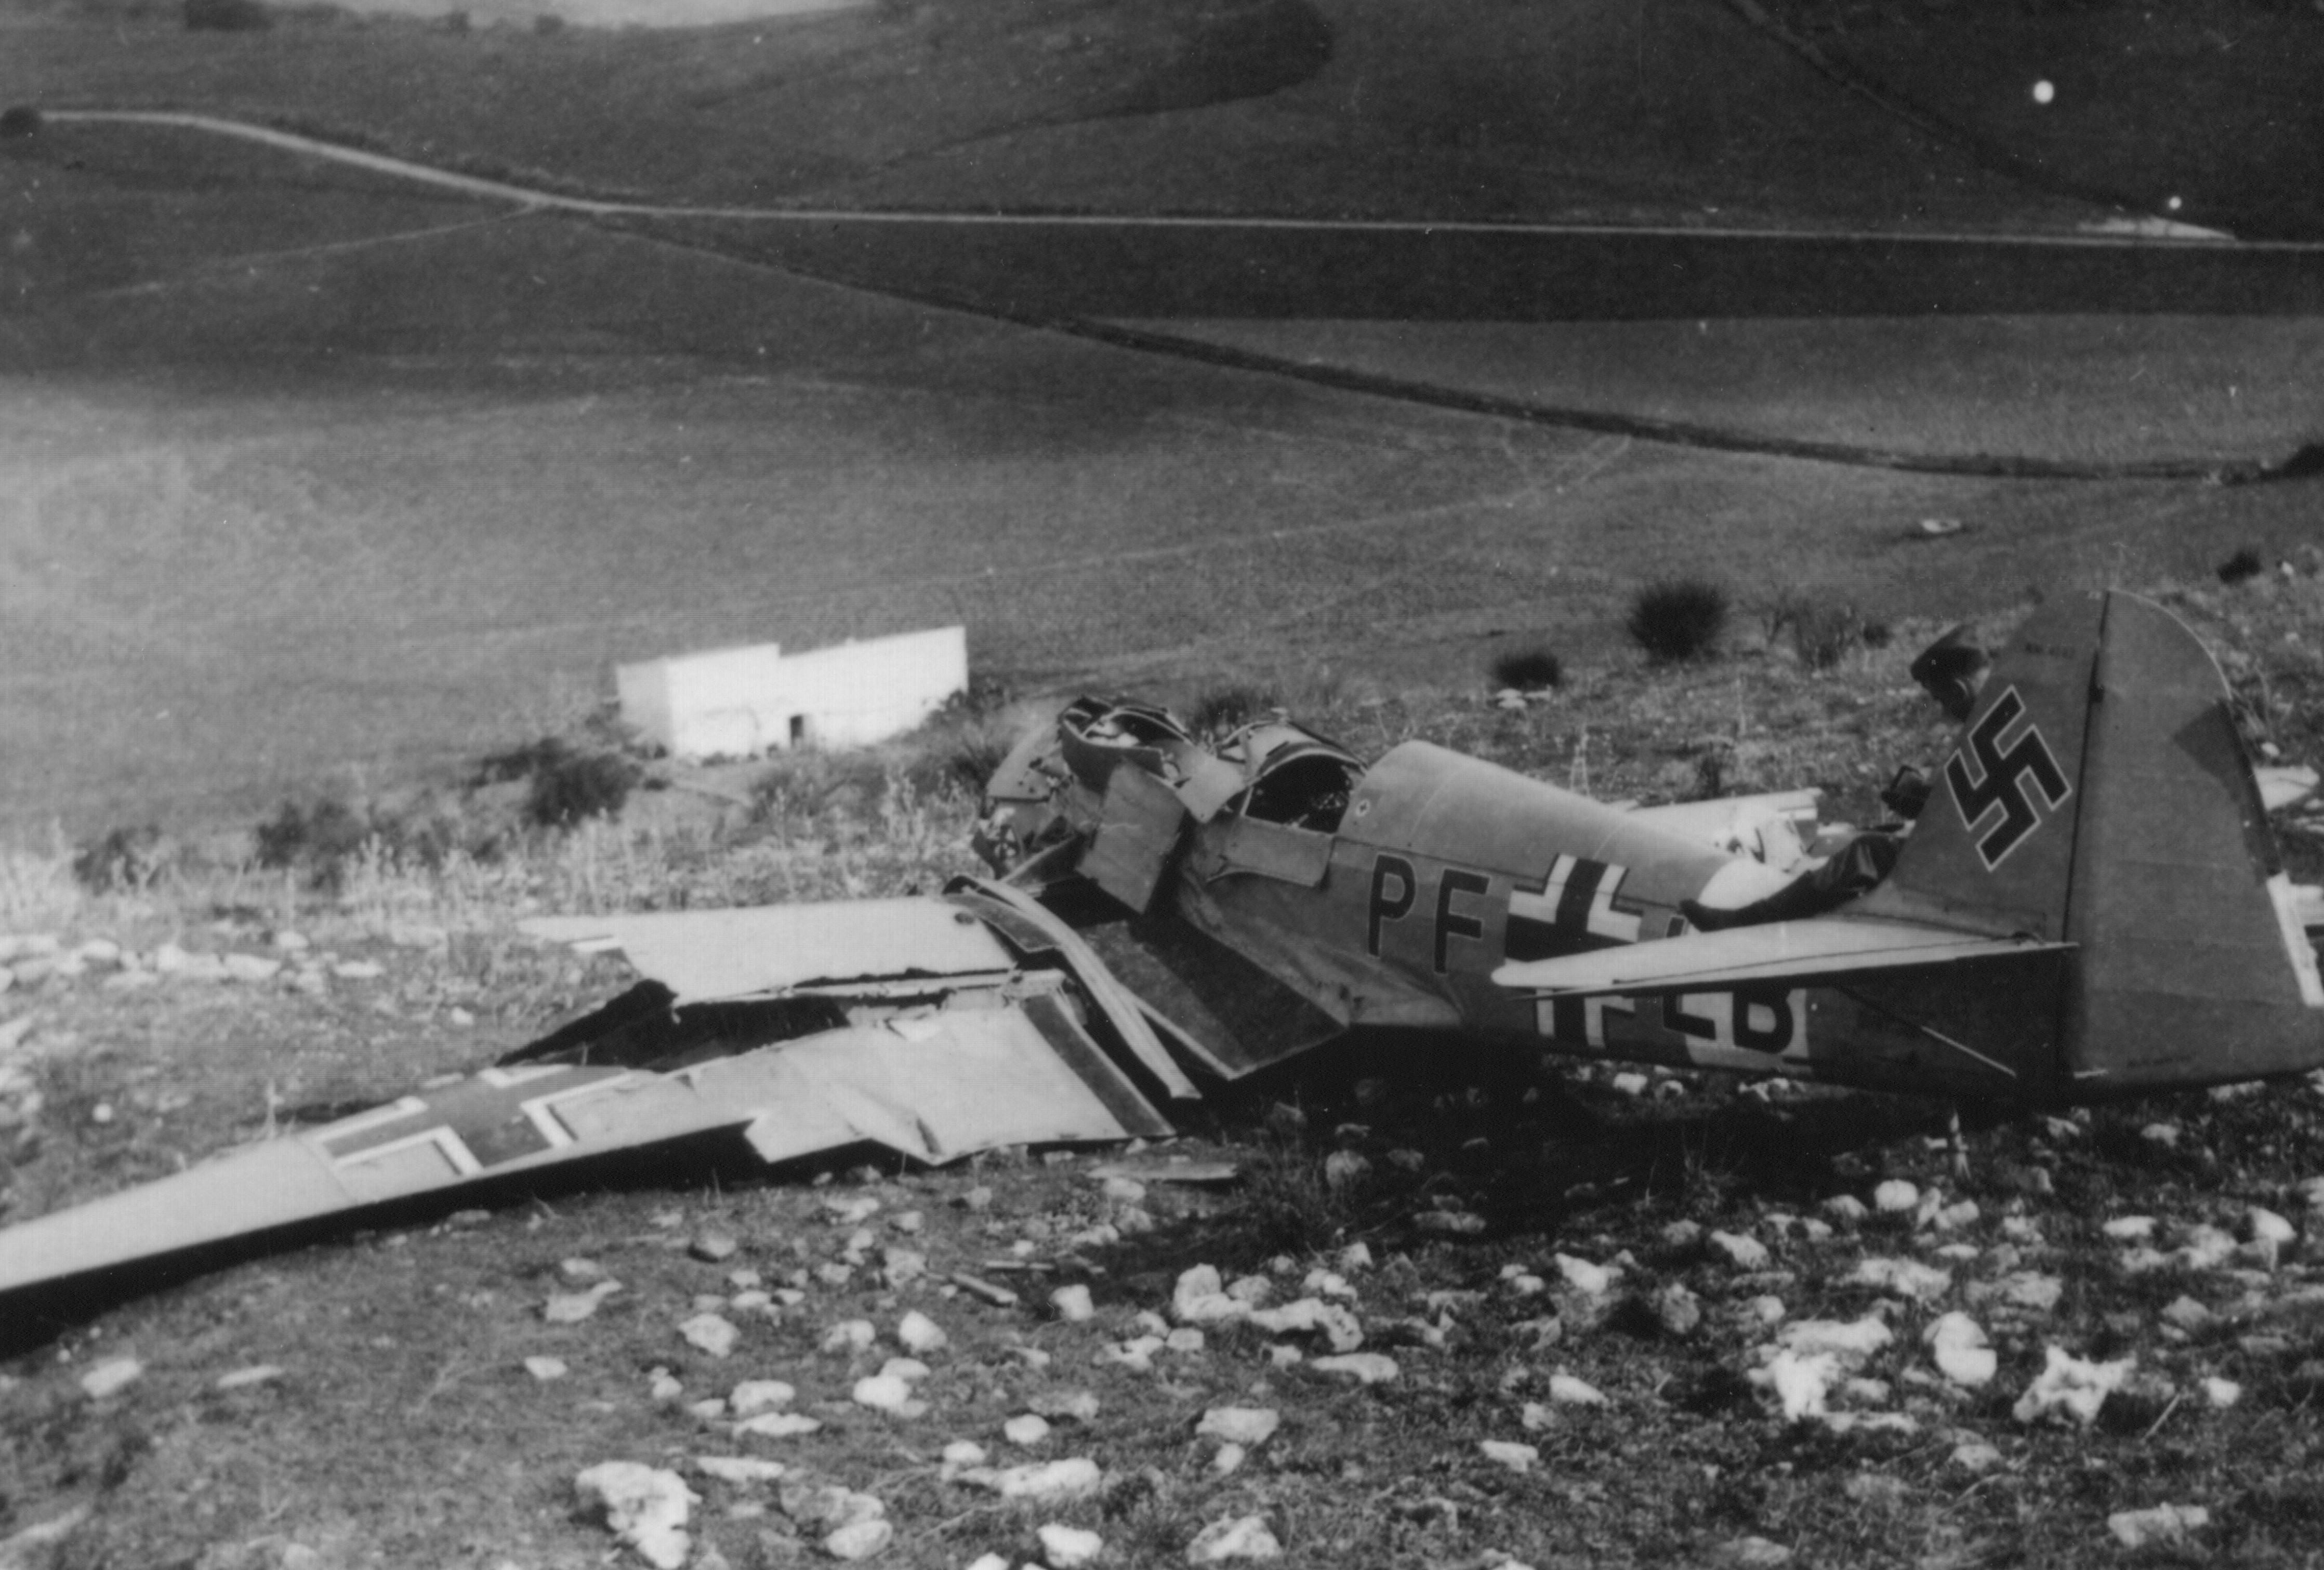 Crashed German Bf 109 fighter, Italy, circa 1940